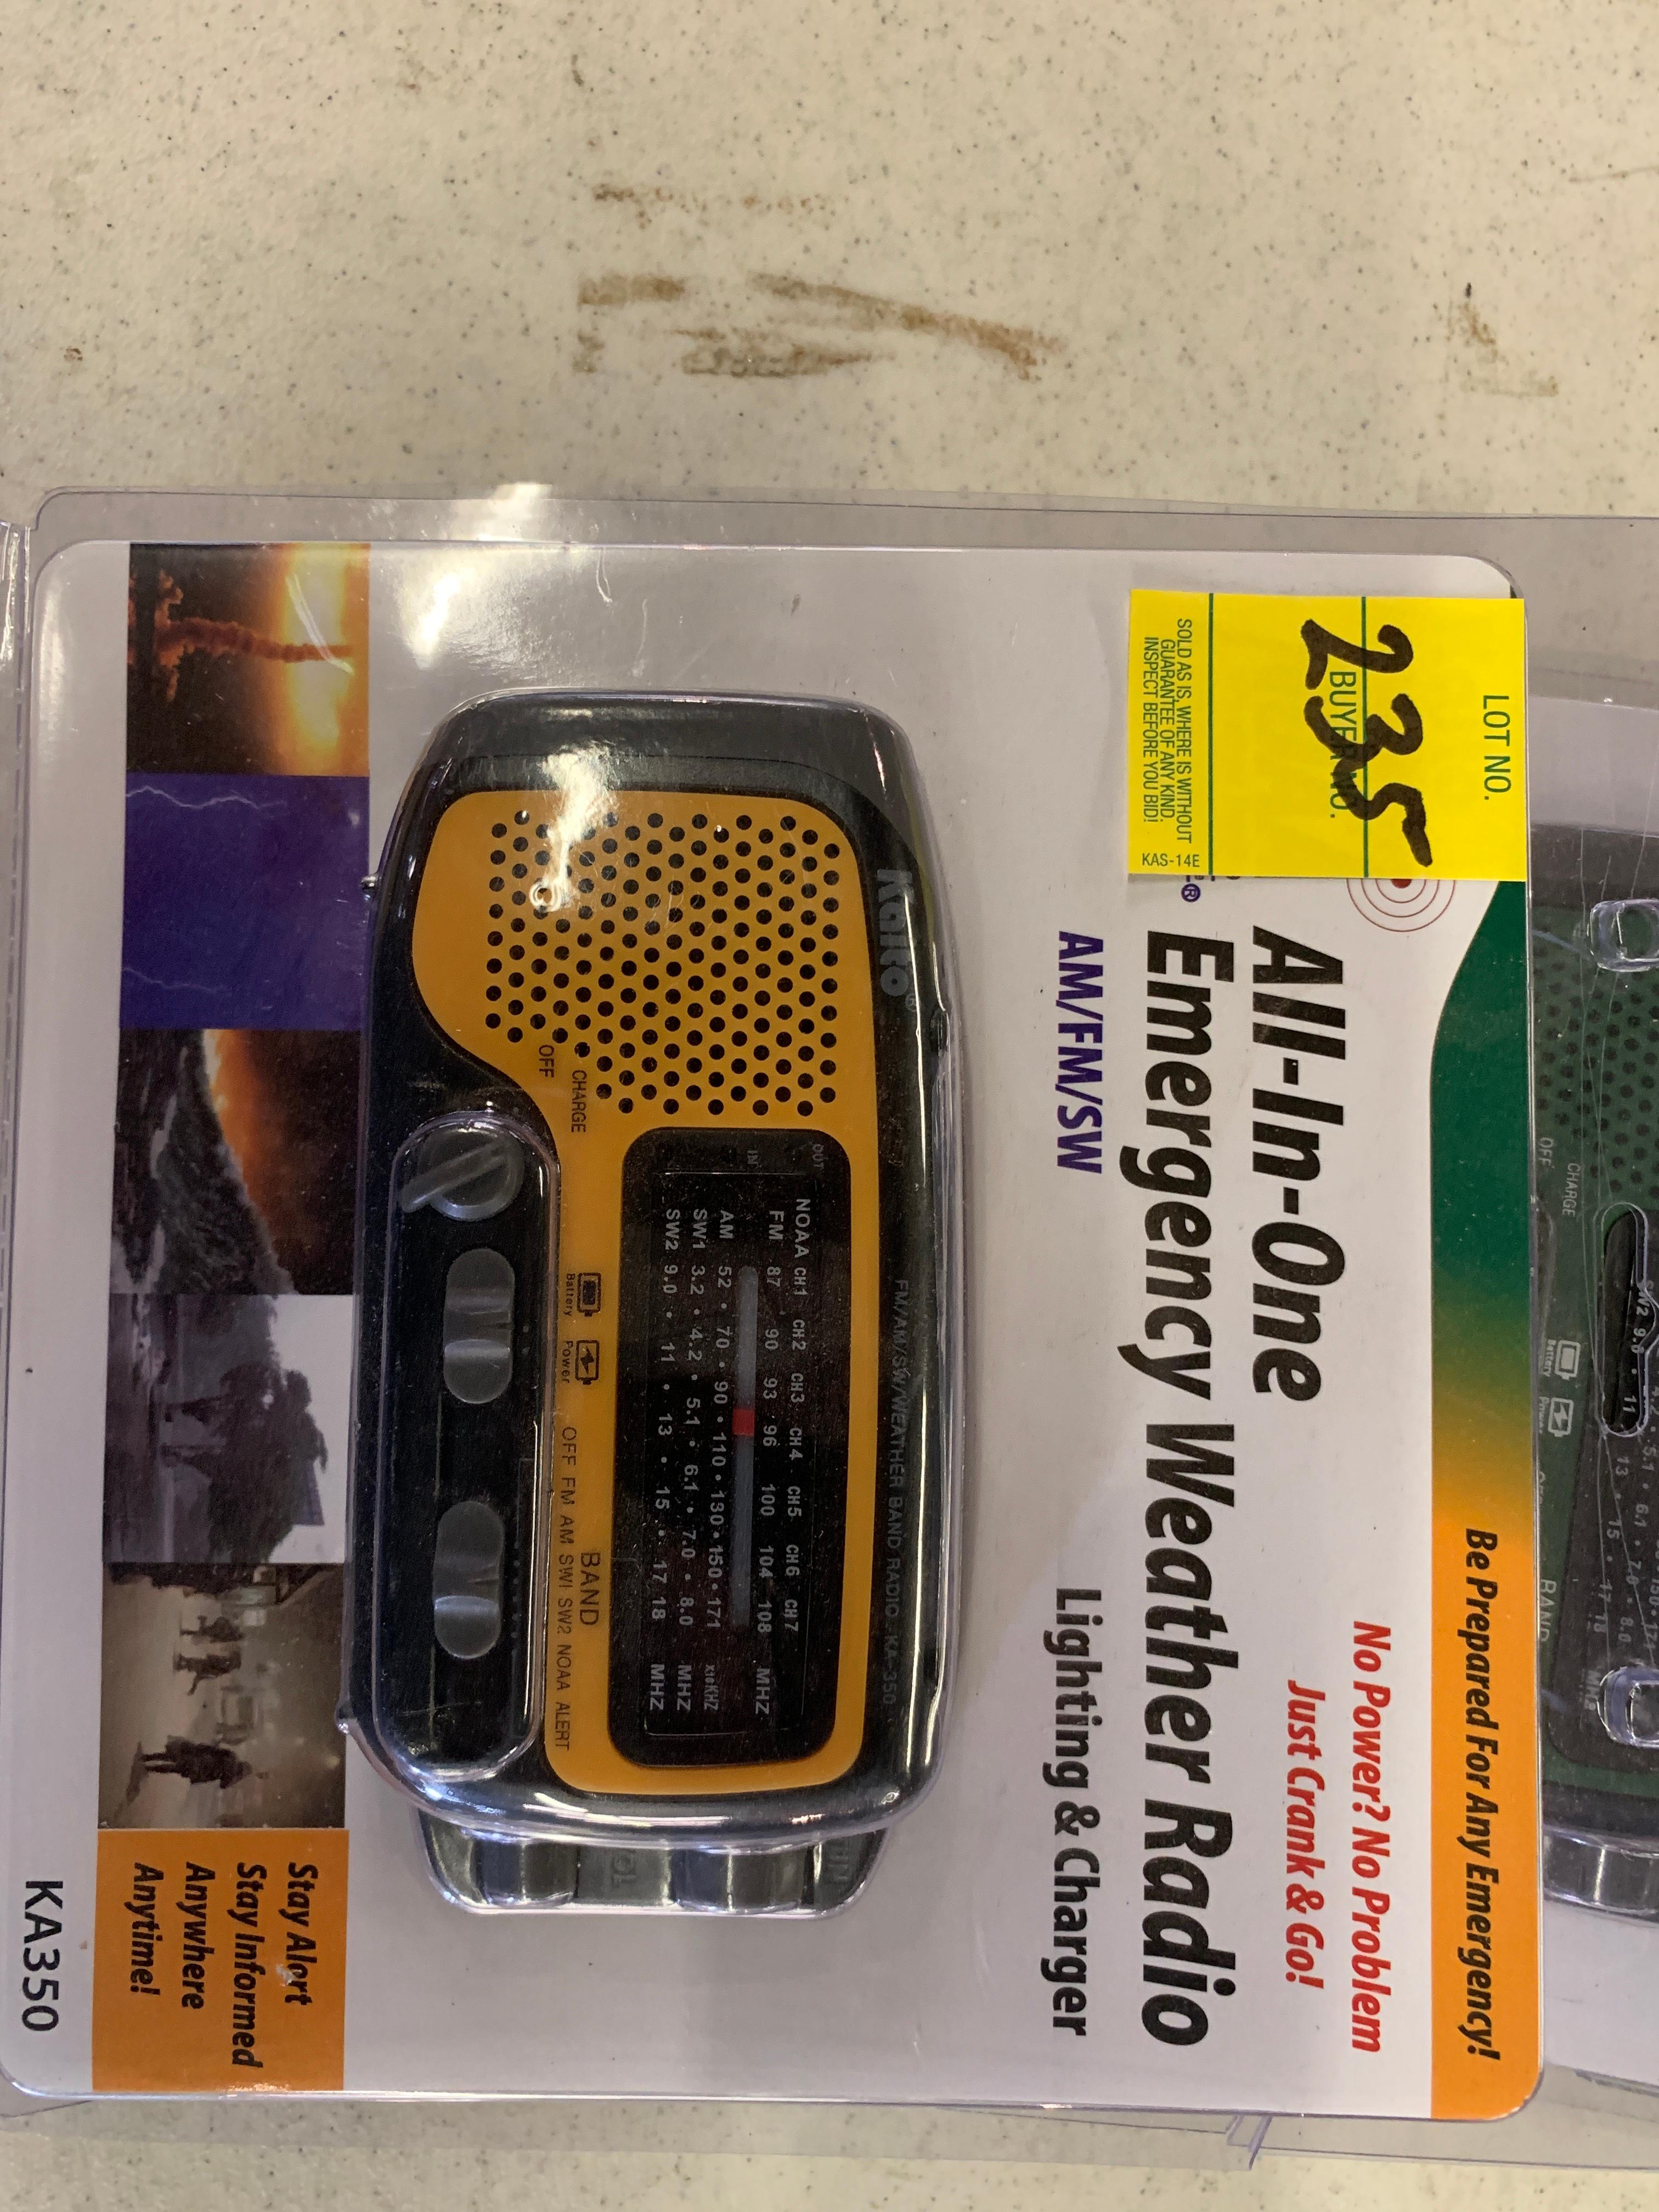 All-in-one Emergency Weather Radio